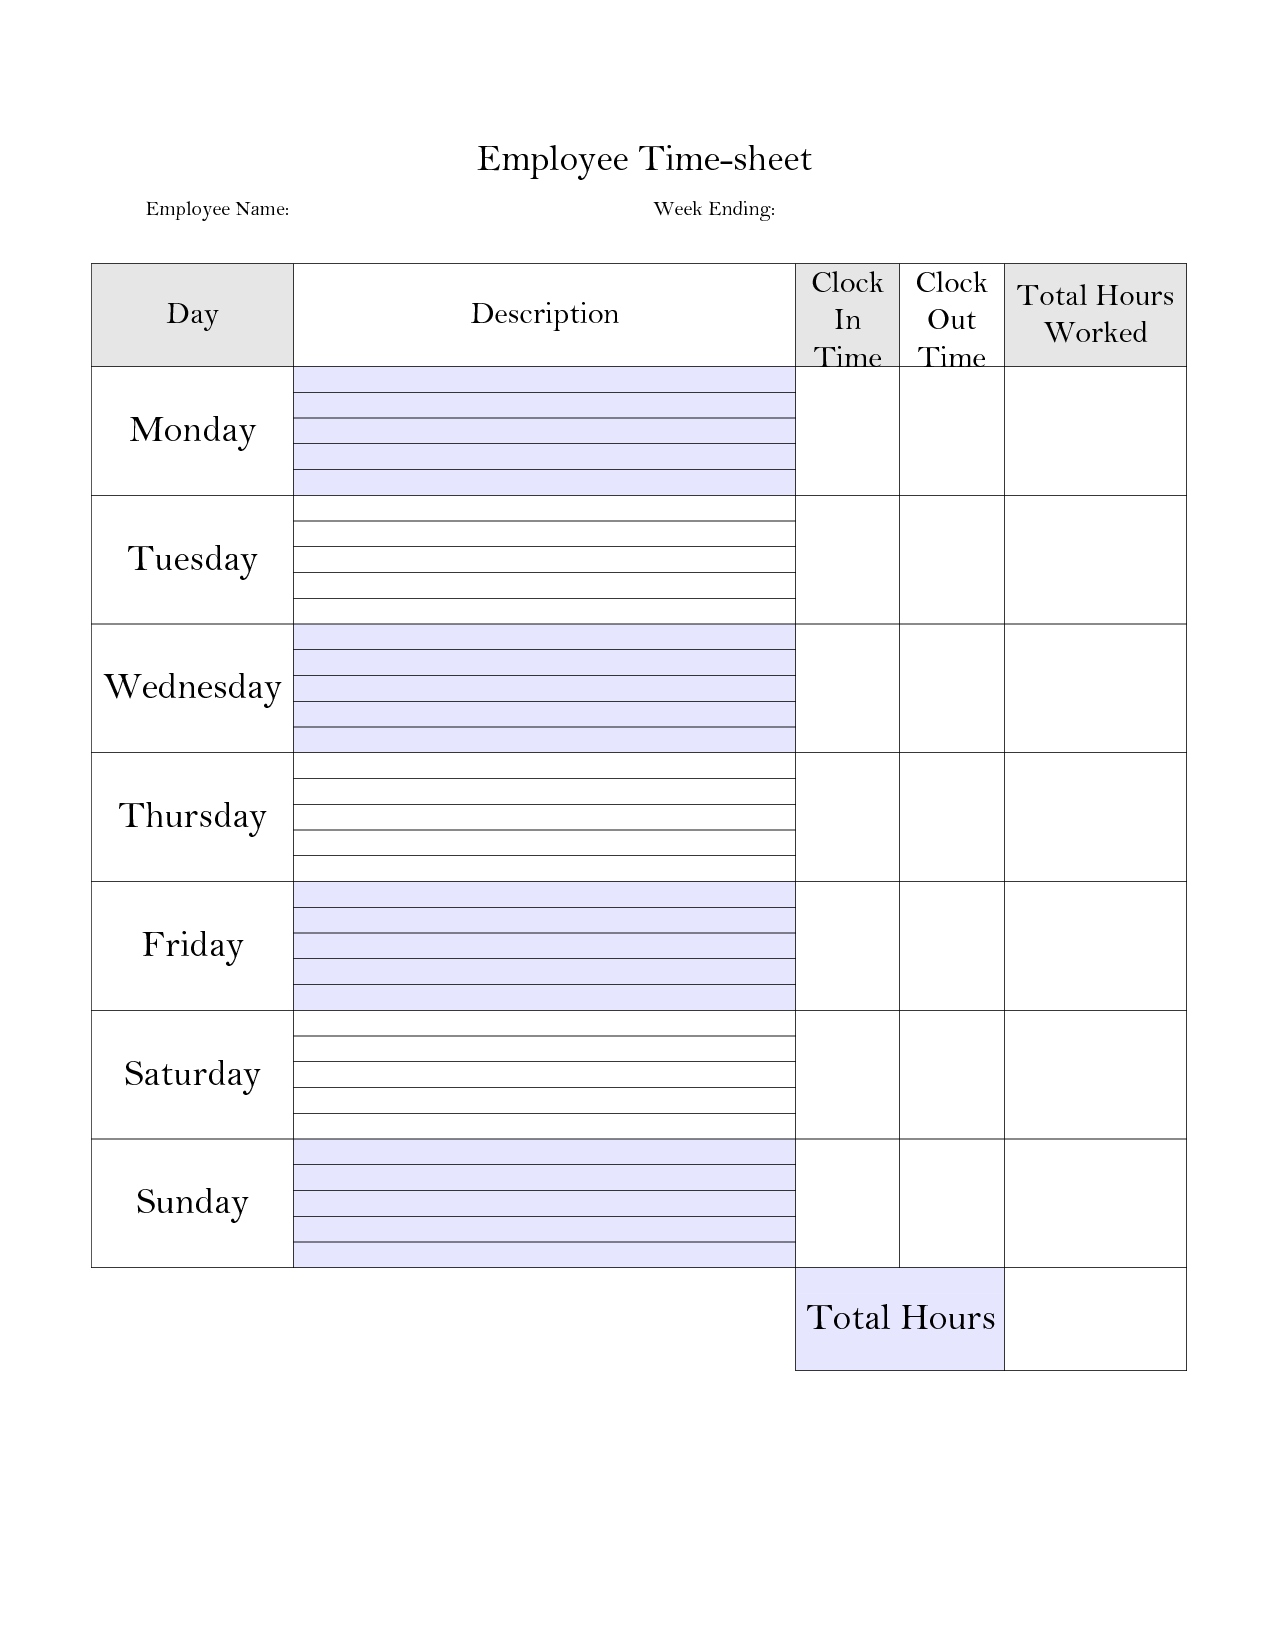 006 Template Ideas Weekly Time Card Timesheet Wondrous Free Excel 